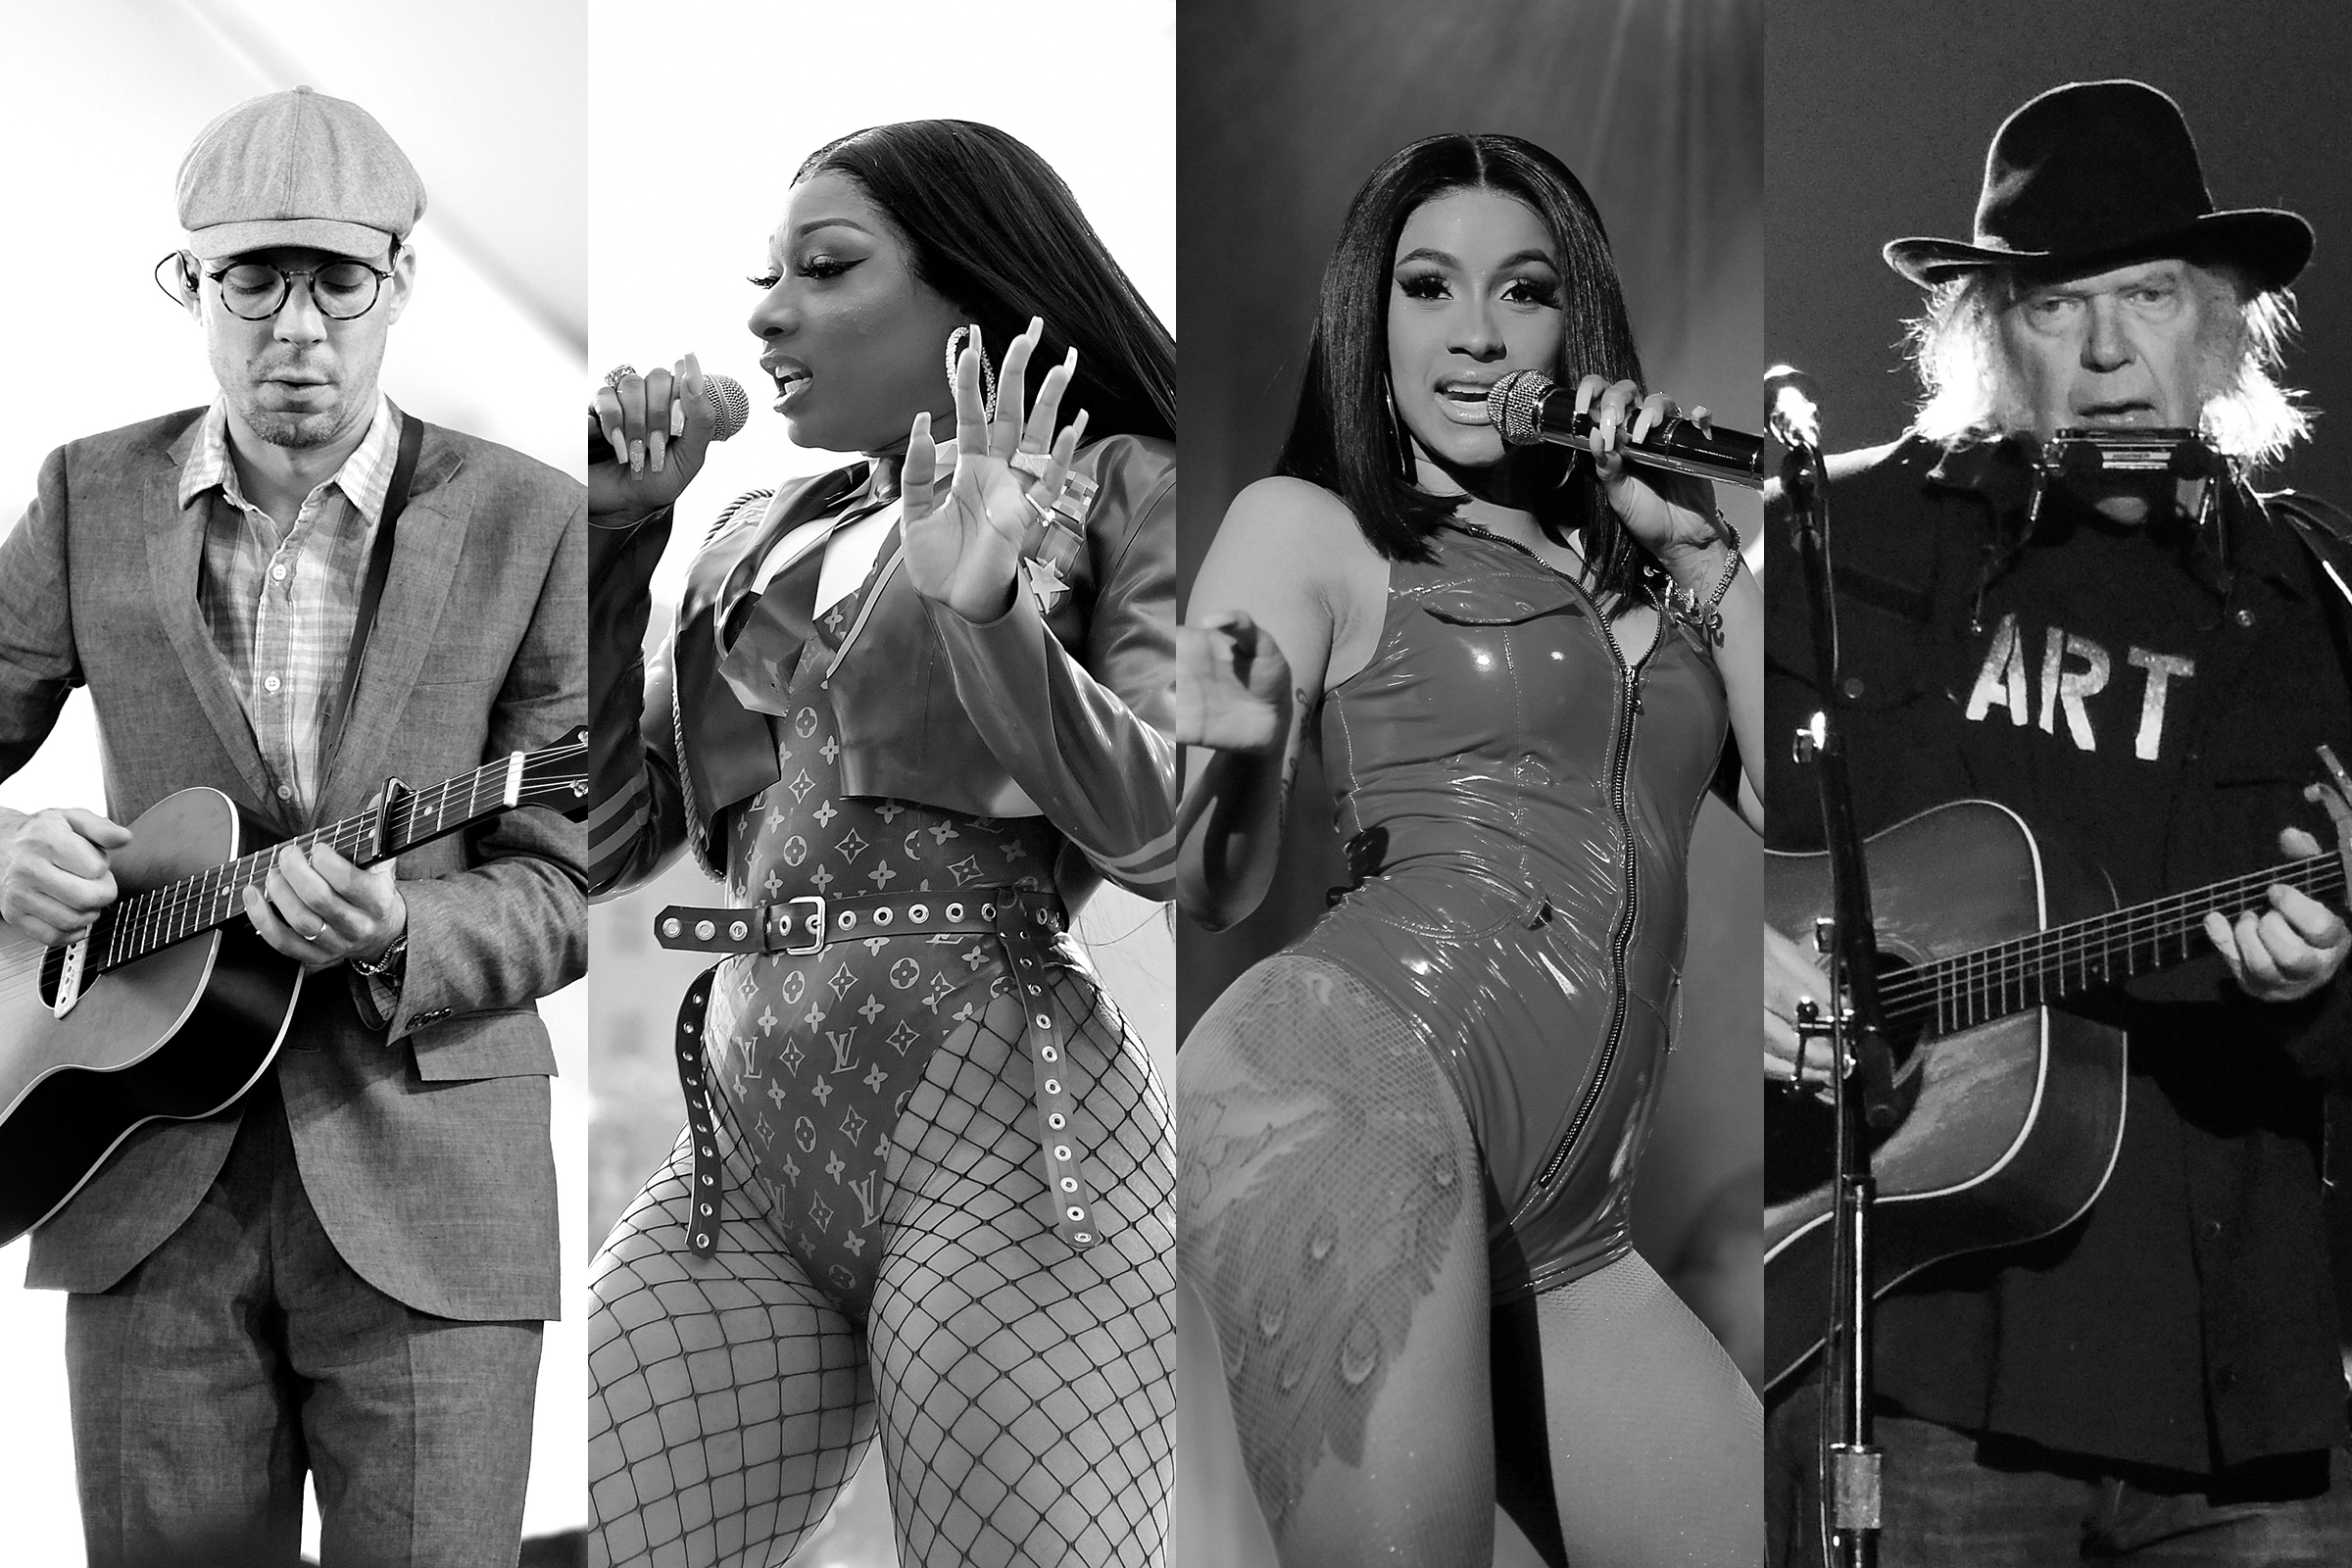 Cardi B and Megan Thee Stallion gave us the song of the summer, Neil Young took on Trump, and we sadly had to say goodbye to Justin Townes Earle.